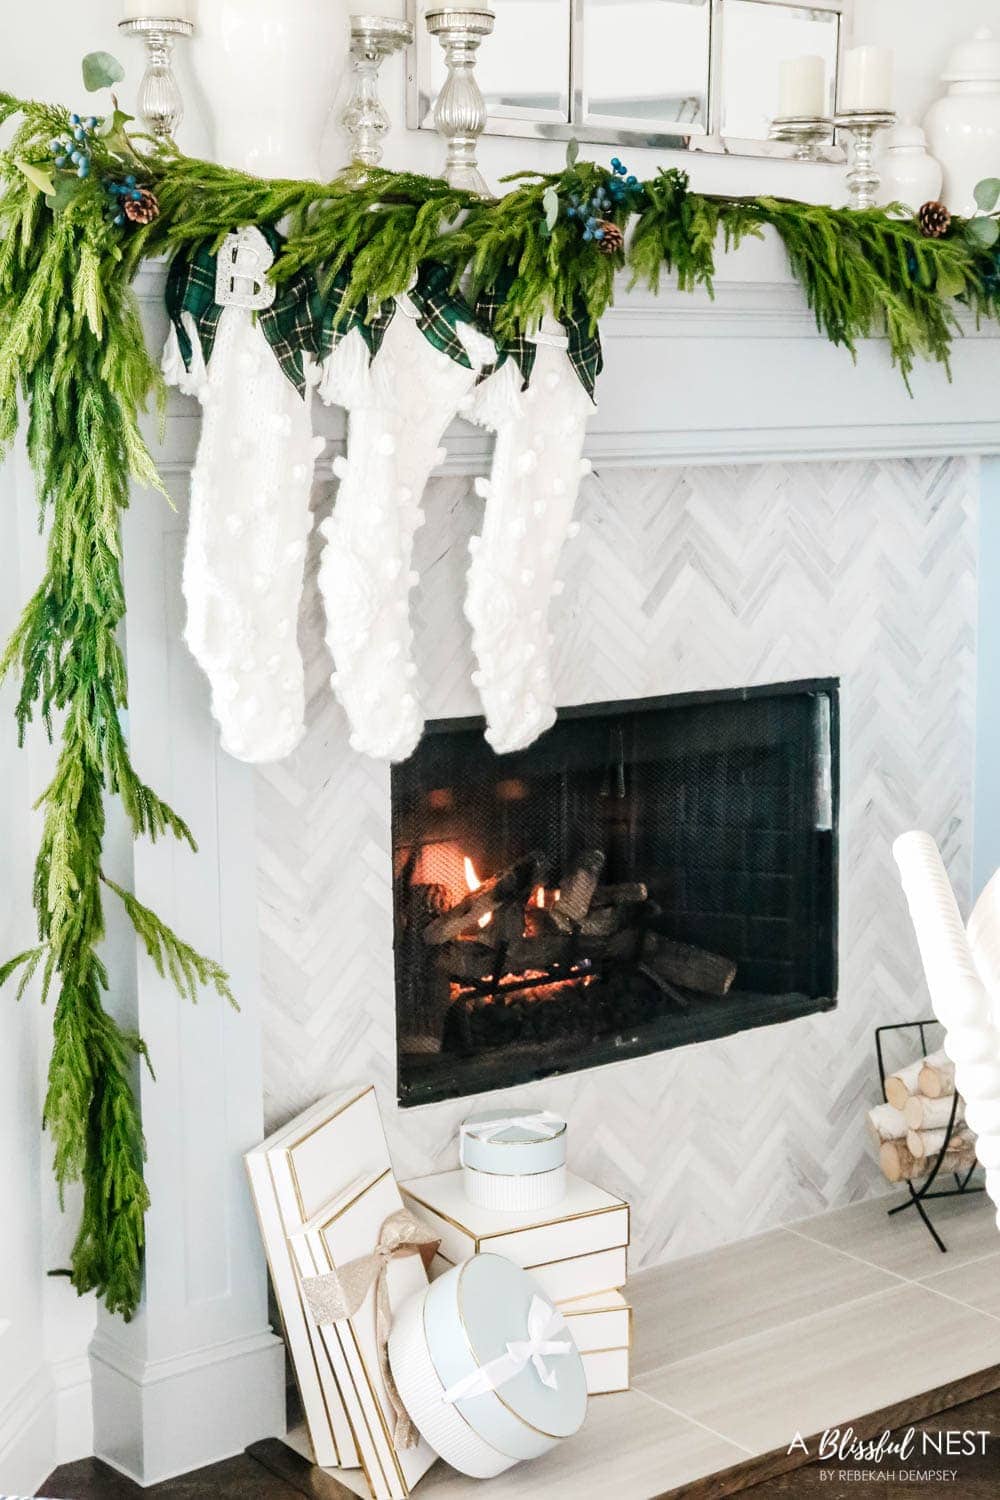 norfolk pine garland with chunky knit stockings on a fireplace mantel